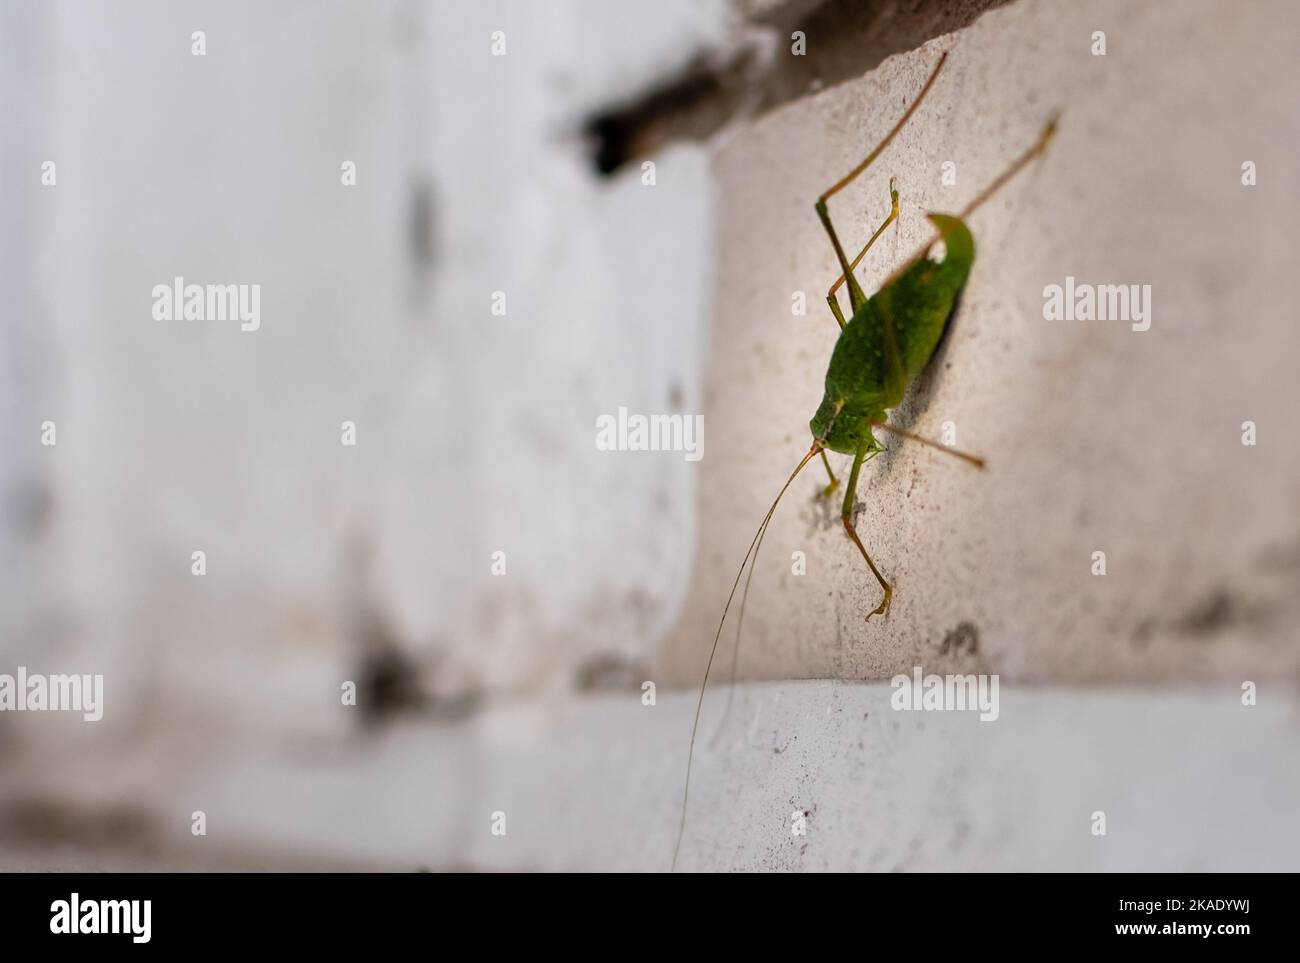 Dark green cricket close-up on blurred stone wall background Stock ...